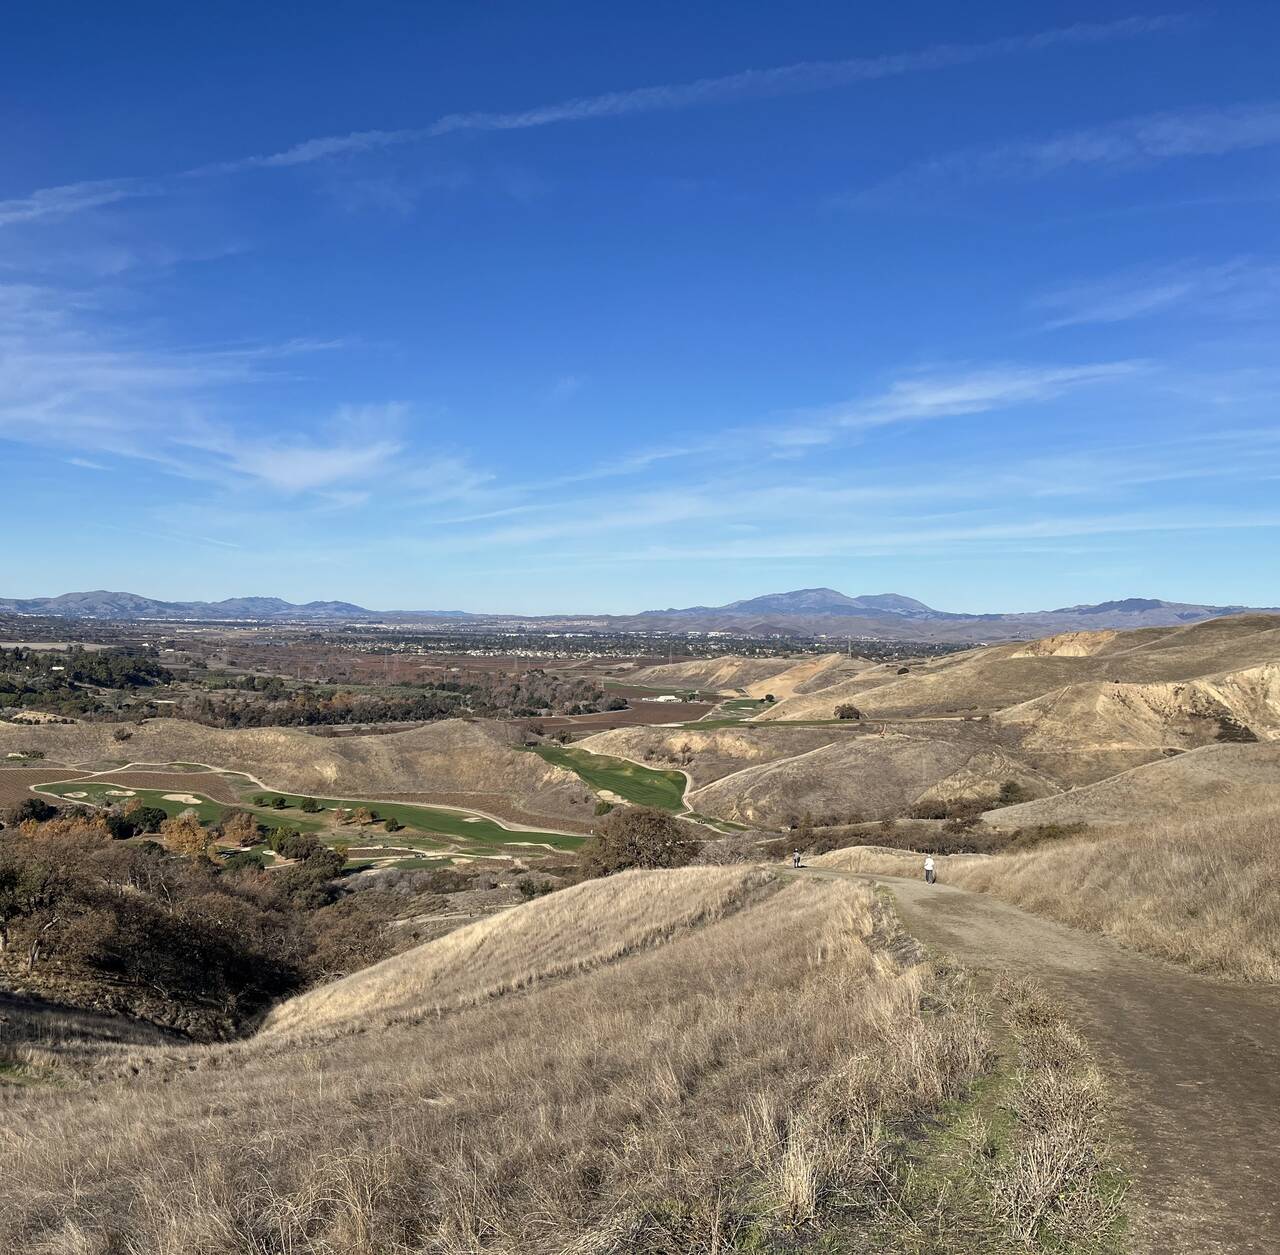 Looking back from the first hill near Del Valle, a green golf course stands out among the dry rolling hills